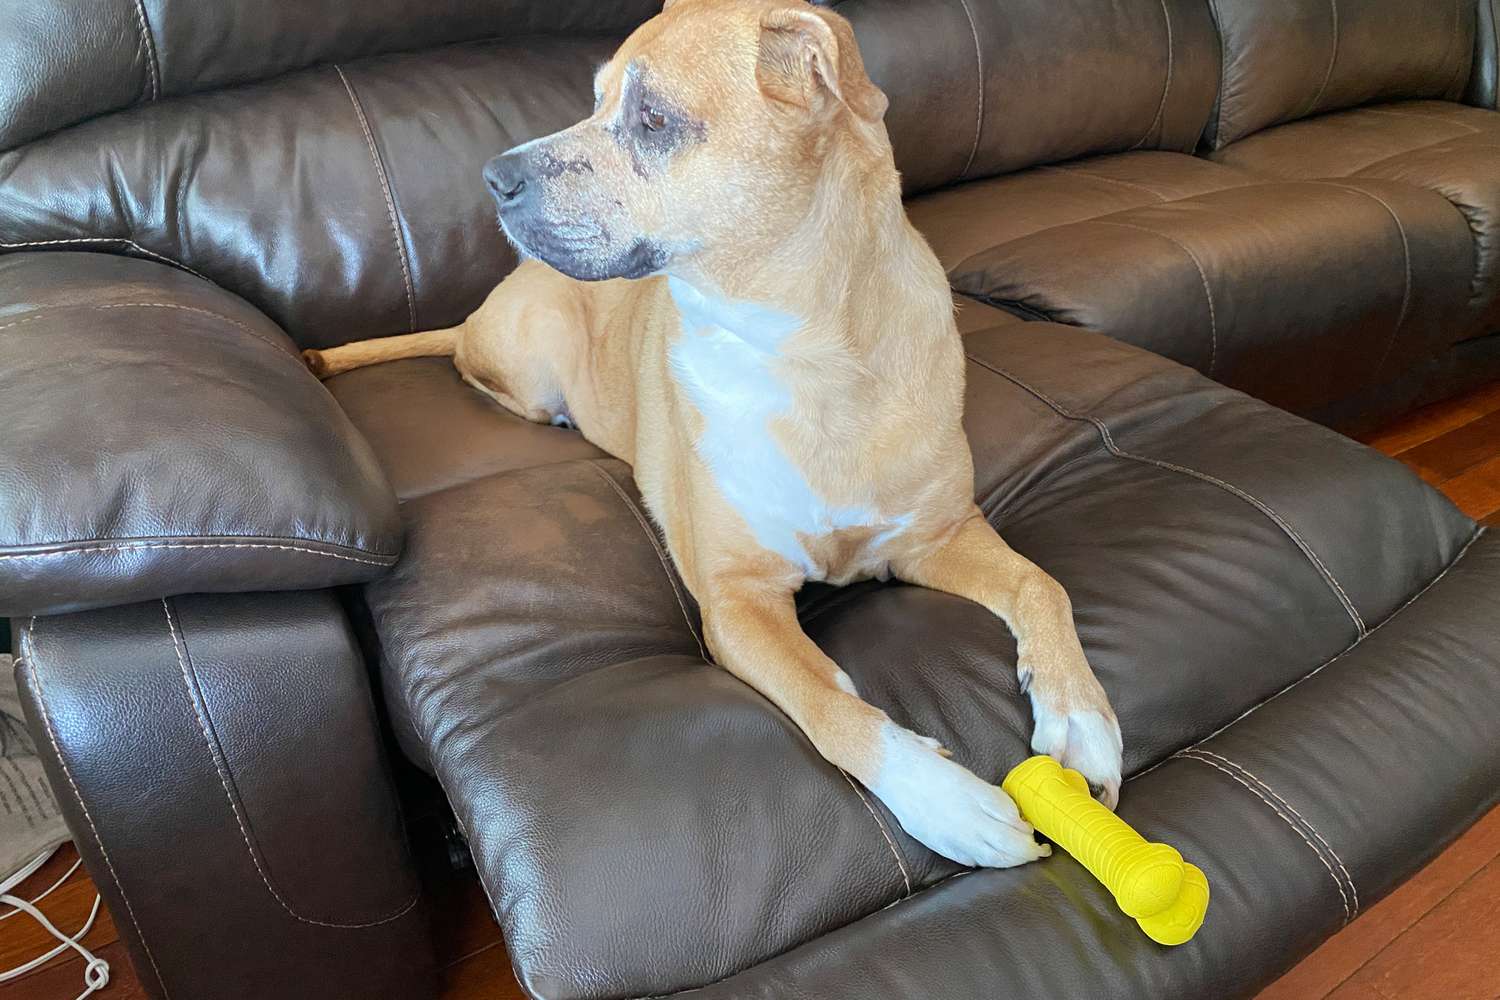 dog holding chicken-flavored Playology Dual Layer Bone Dog Toy between paws while on couch